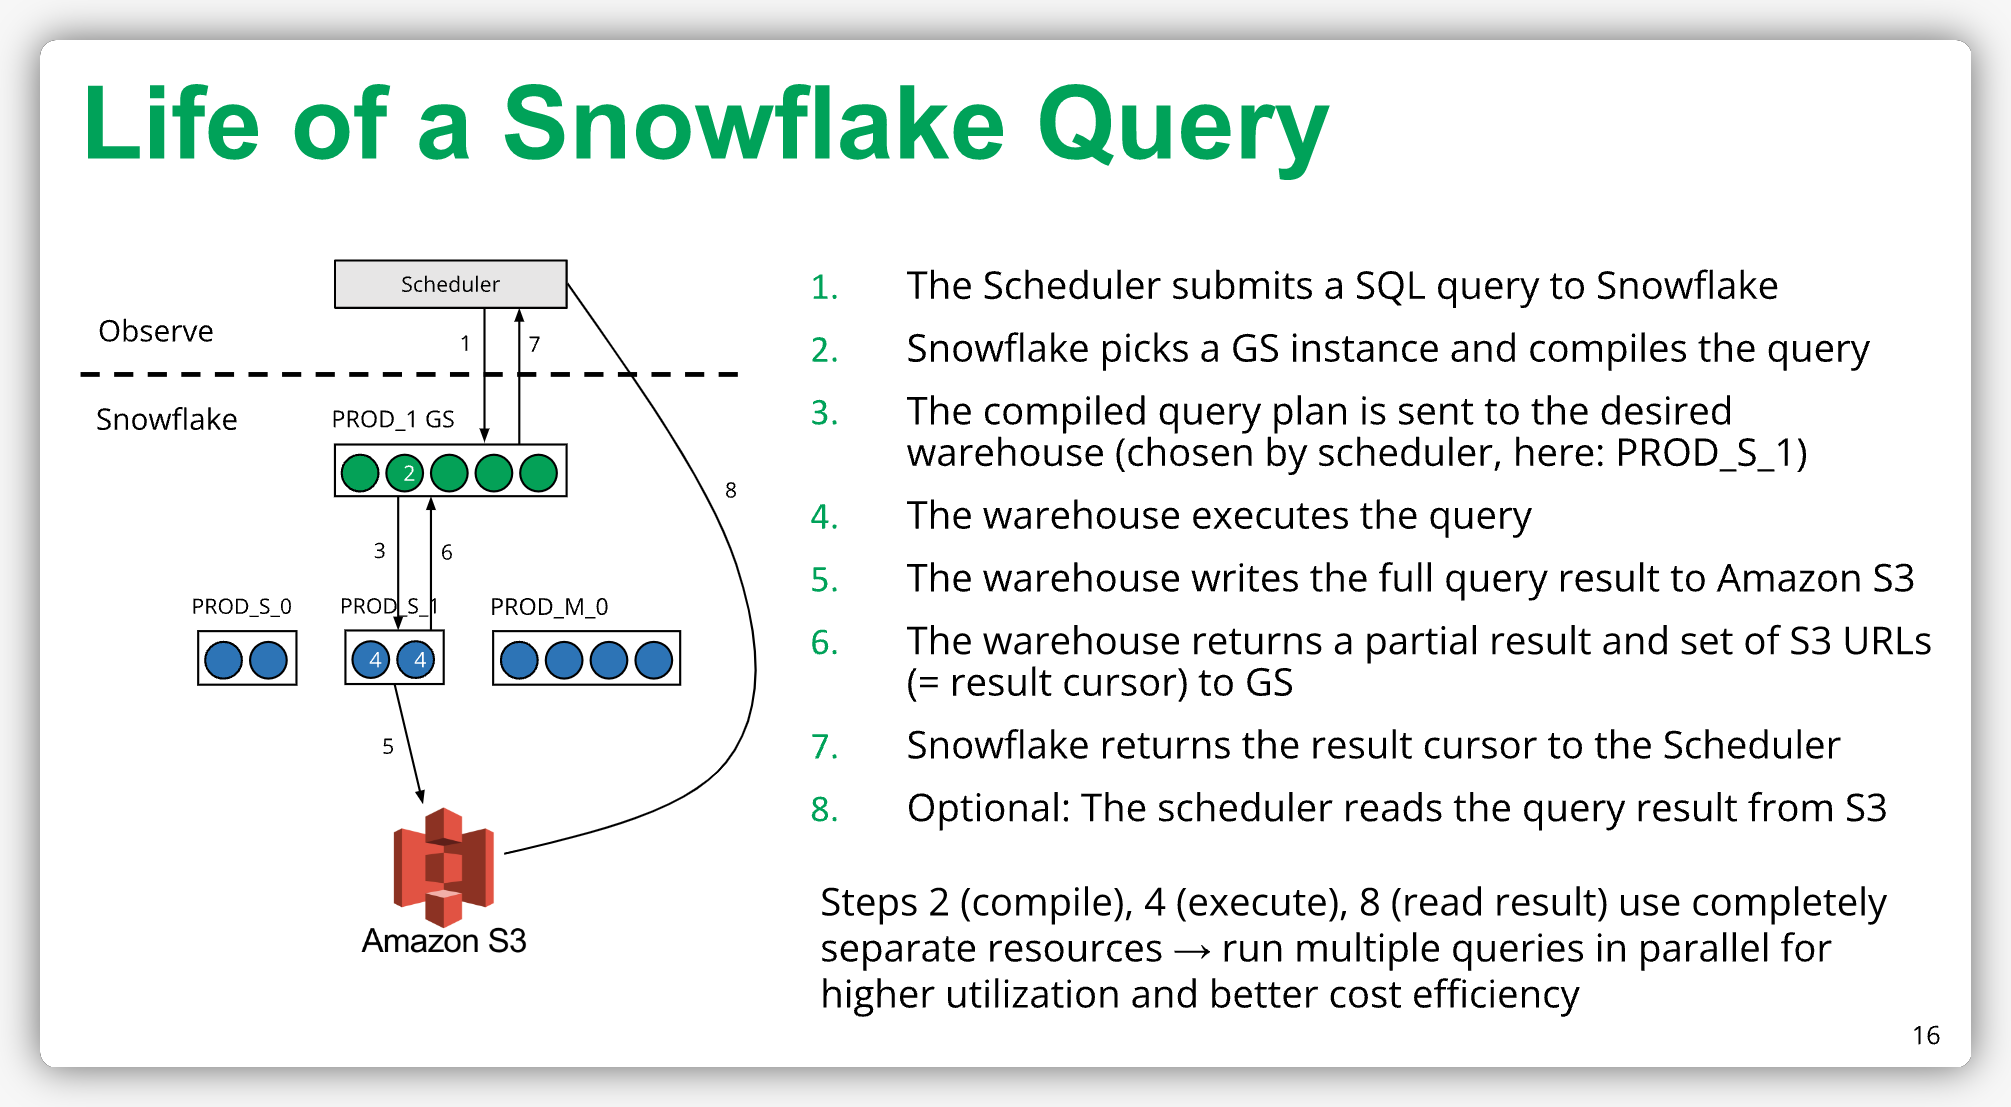 LIfe of a snowflake query in observe